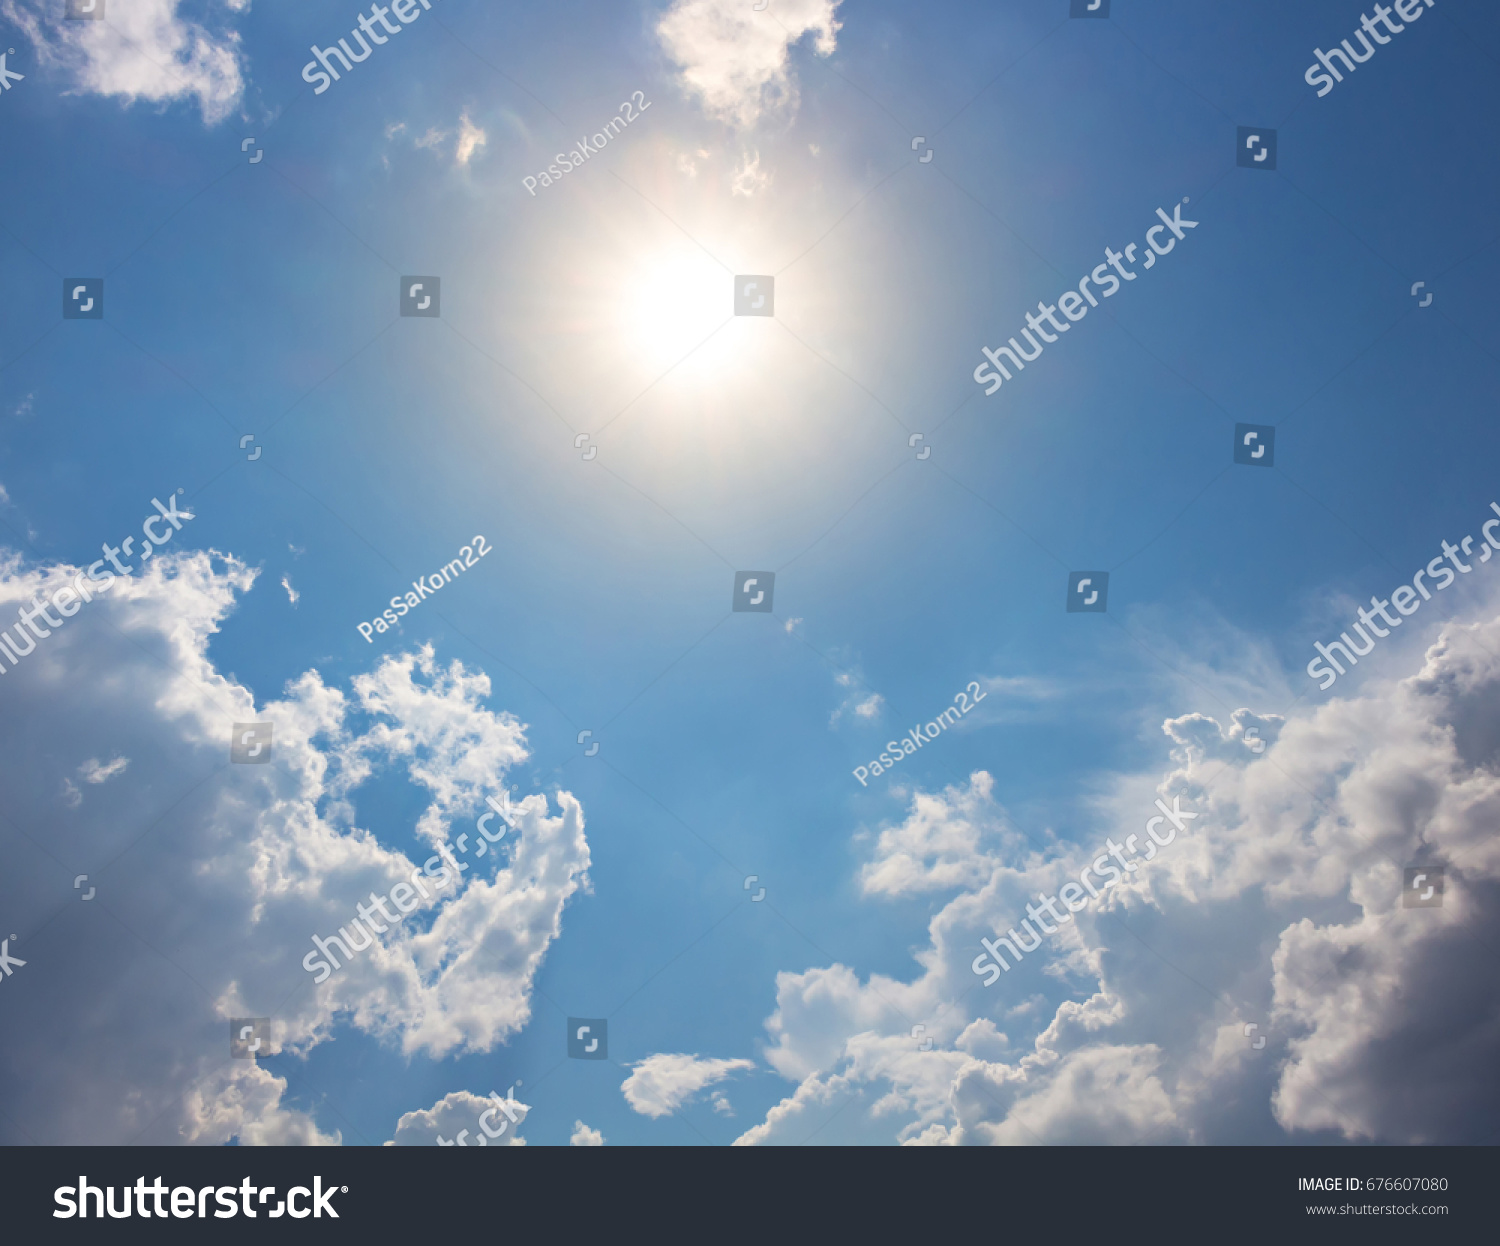 Sun with orange light on blue sky and bright clouds #676607080